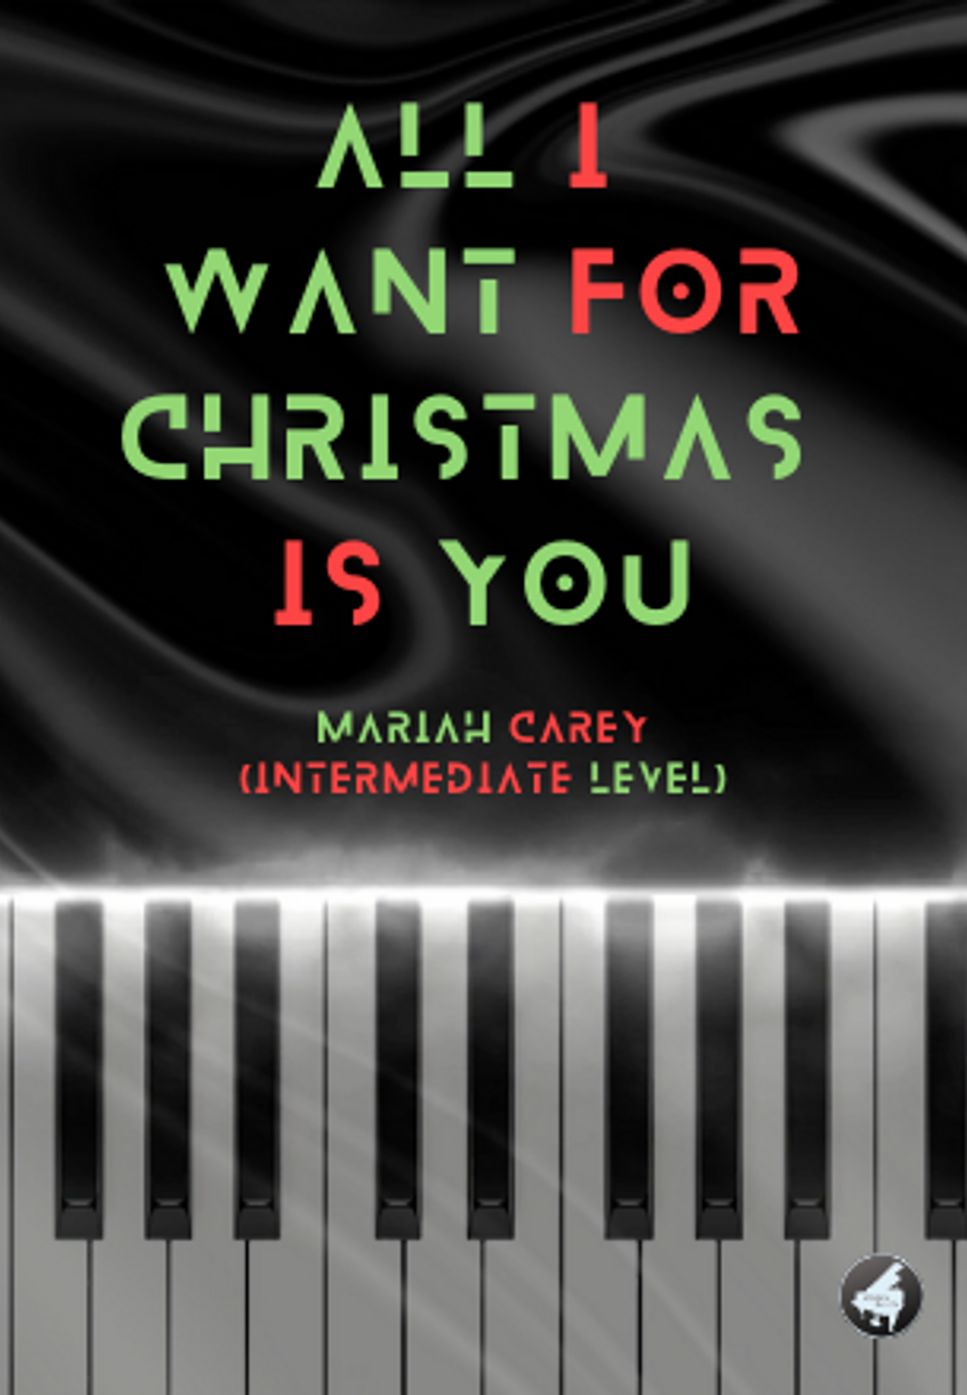 Mariah Carey - All I Want for Christmas is You (Intermediate Level) by Aldora Davita